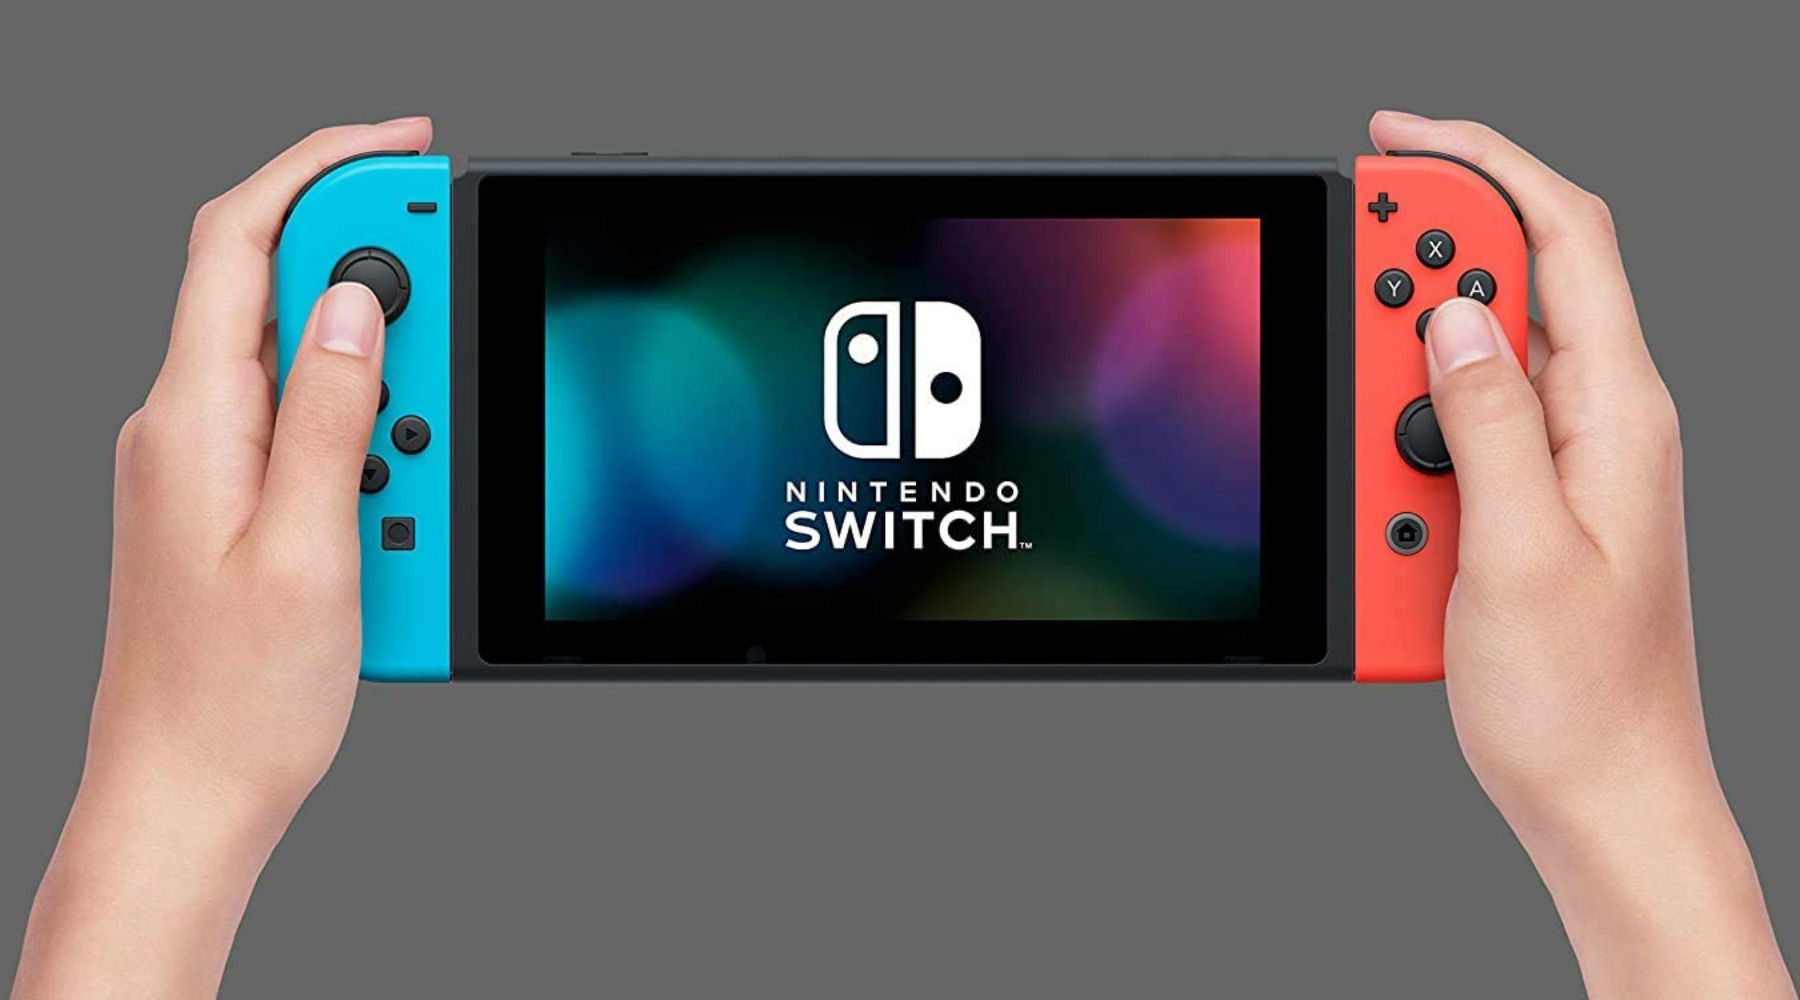 The Nintendo Switch console is close